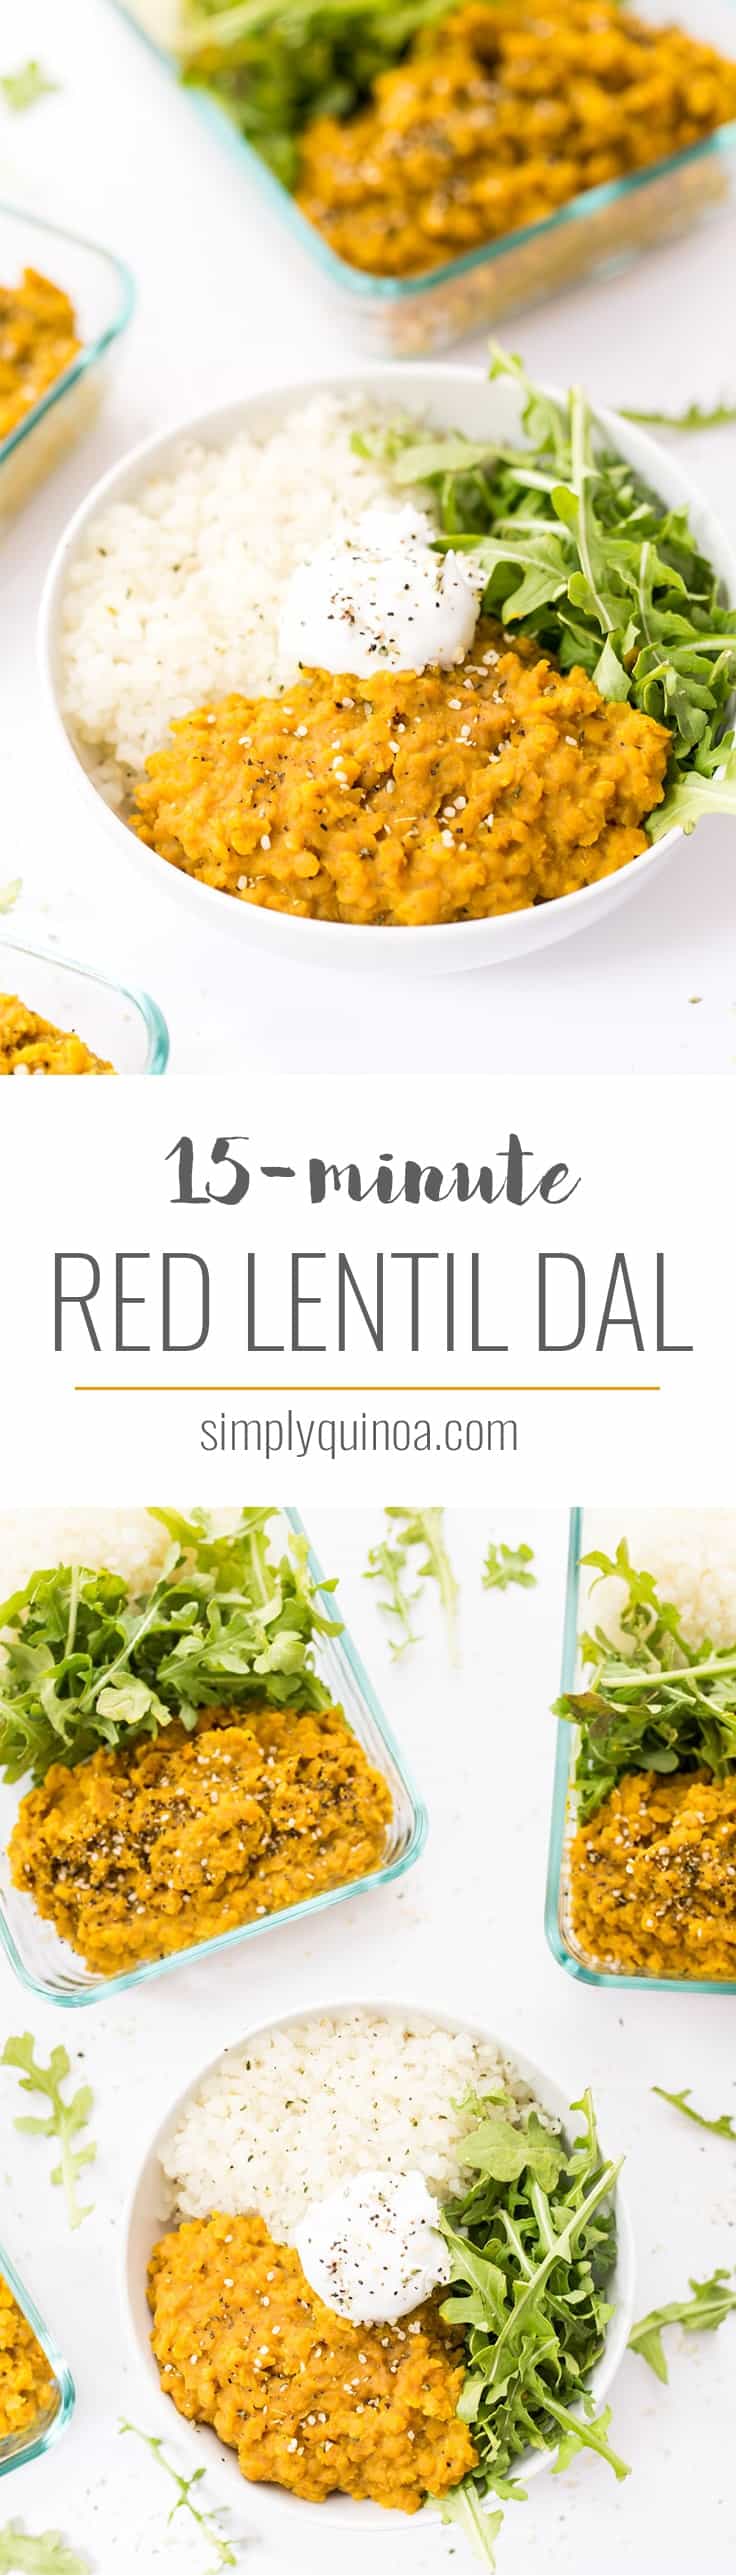 Using just one pot and ready in just 15 minutes, this easy VEGAN RED LENTIL DAL is a flavorful, plant-powered meal. Serve with quinoa, rice or flatbreads!